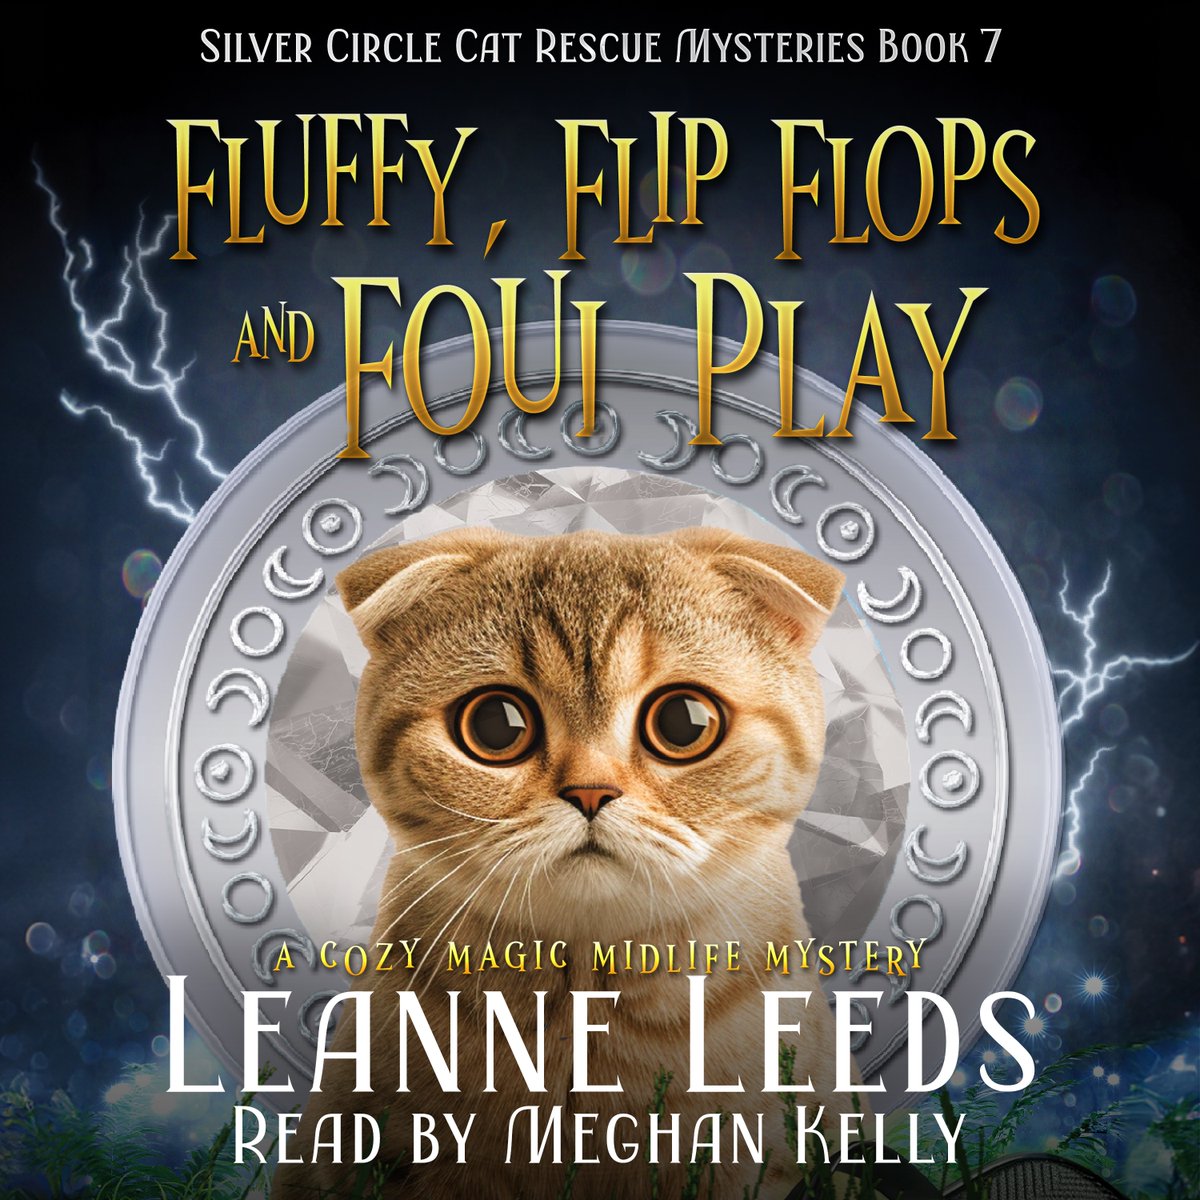 Just Released!  Fluffy, Flip Flops & Foul Play: Silver Circle Cat Rescue Mysteries Book 7 by the AMAZING Leanne Leeds!!  You will LOVE this one- Scottish Fold kitten!  Out NOW!!

#humanvoicesonly #cozymysteryaudio #cozymysteryaudiobook

audible.com/pd/Fluffy-Flip…